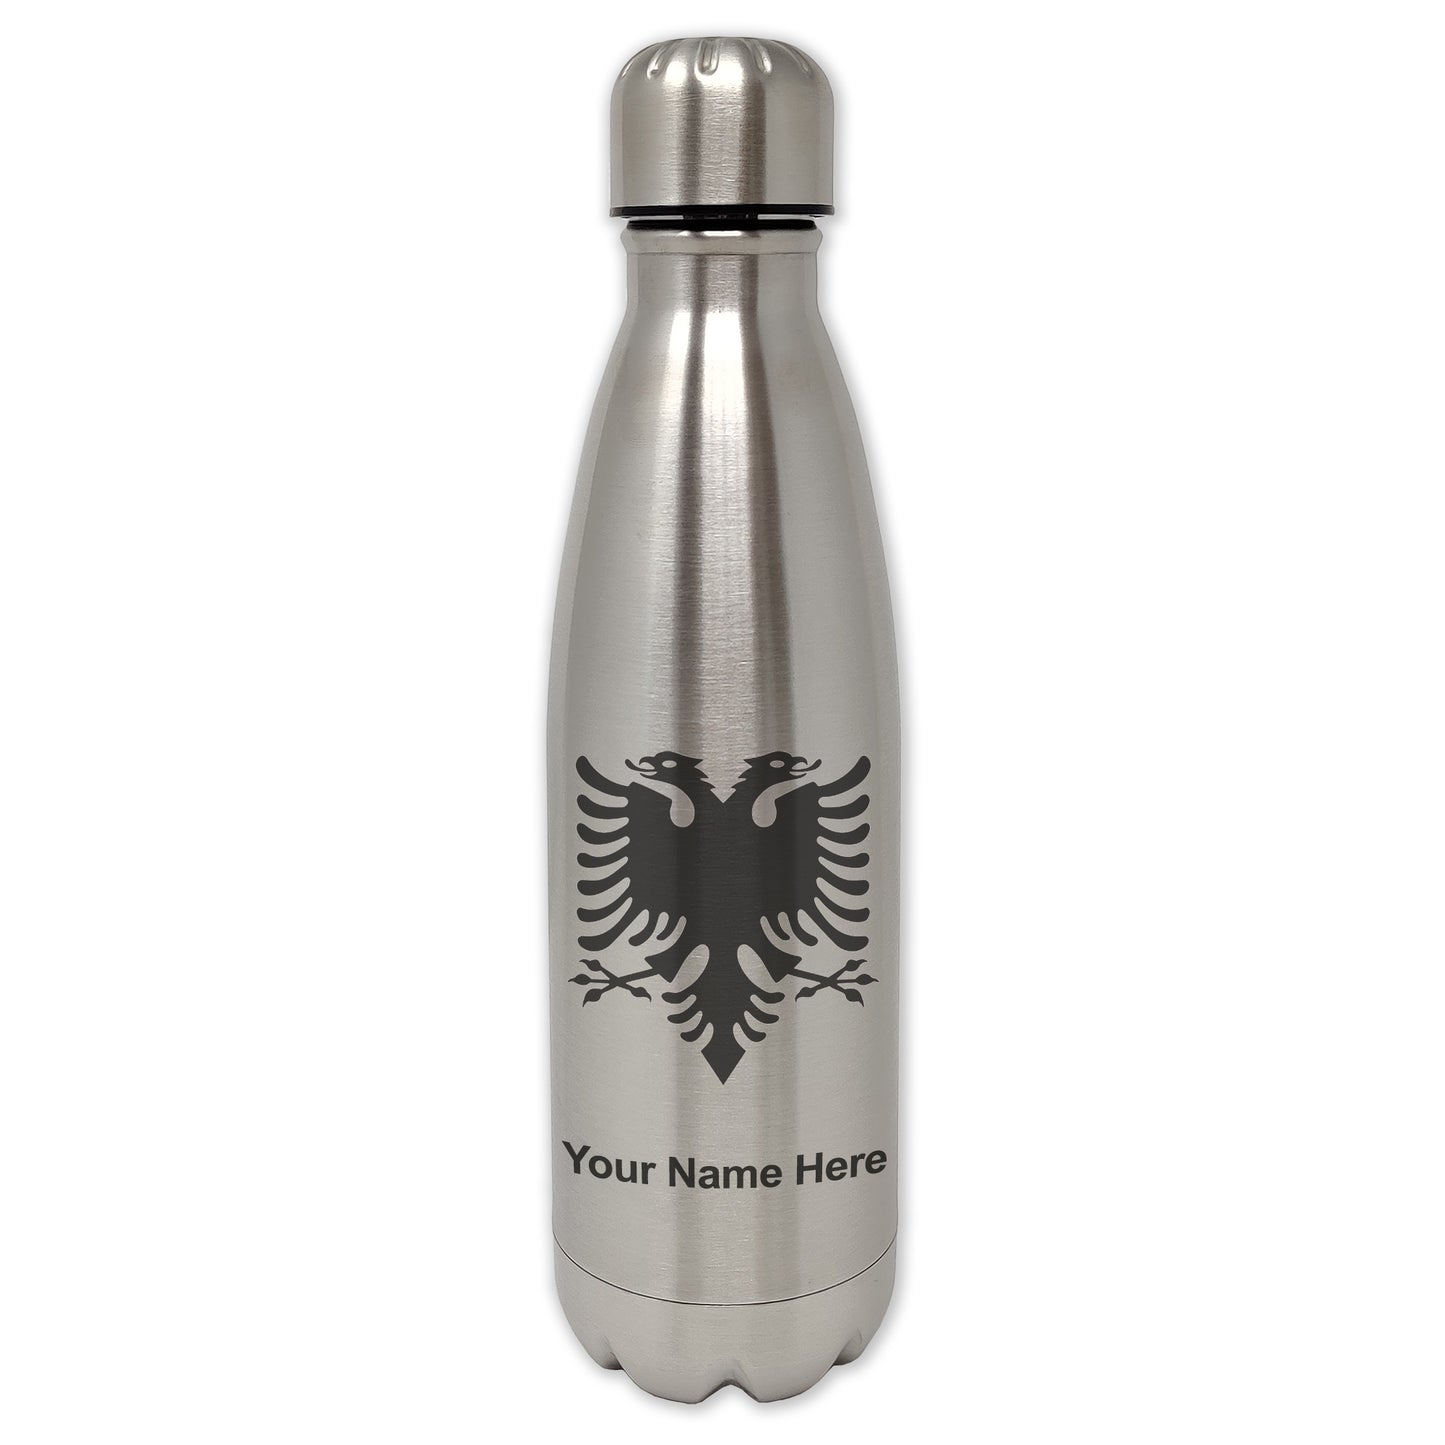 LaserGram Single Wall Water Bottle, Flag of Albania, Personalized Engraving Included